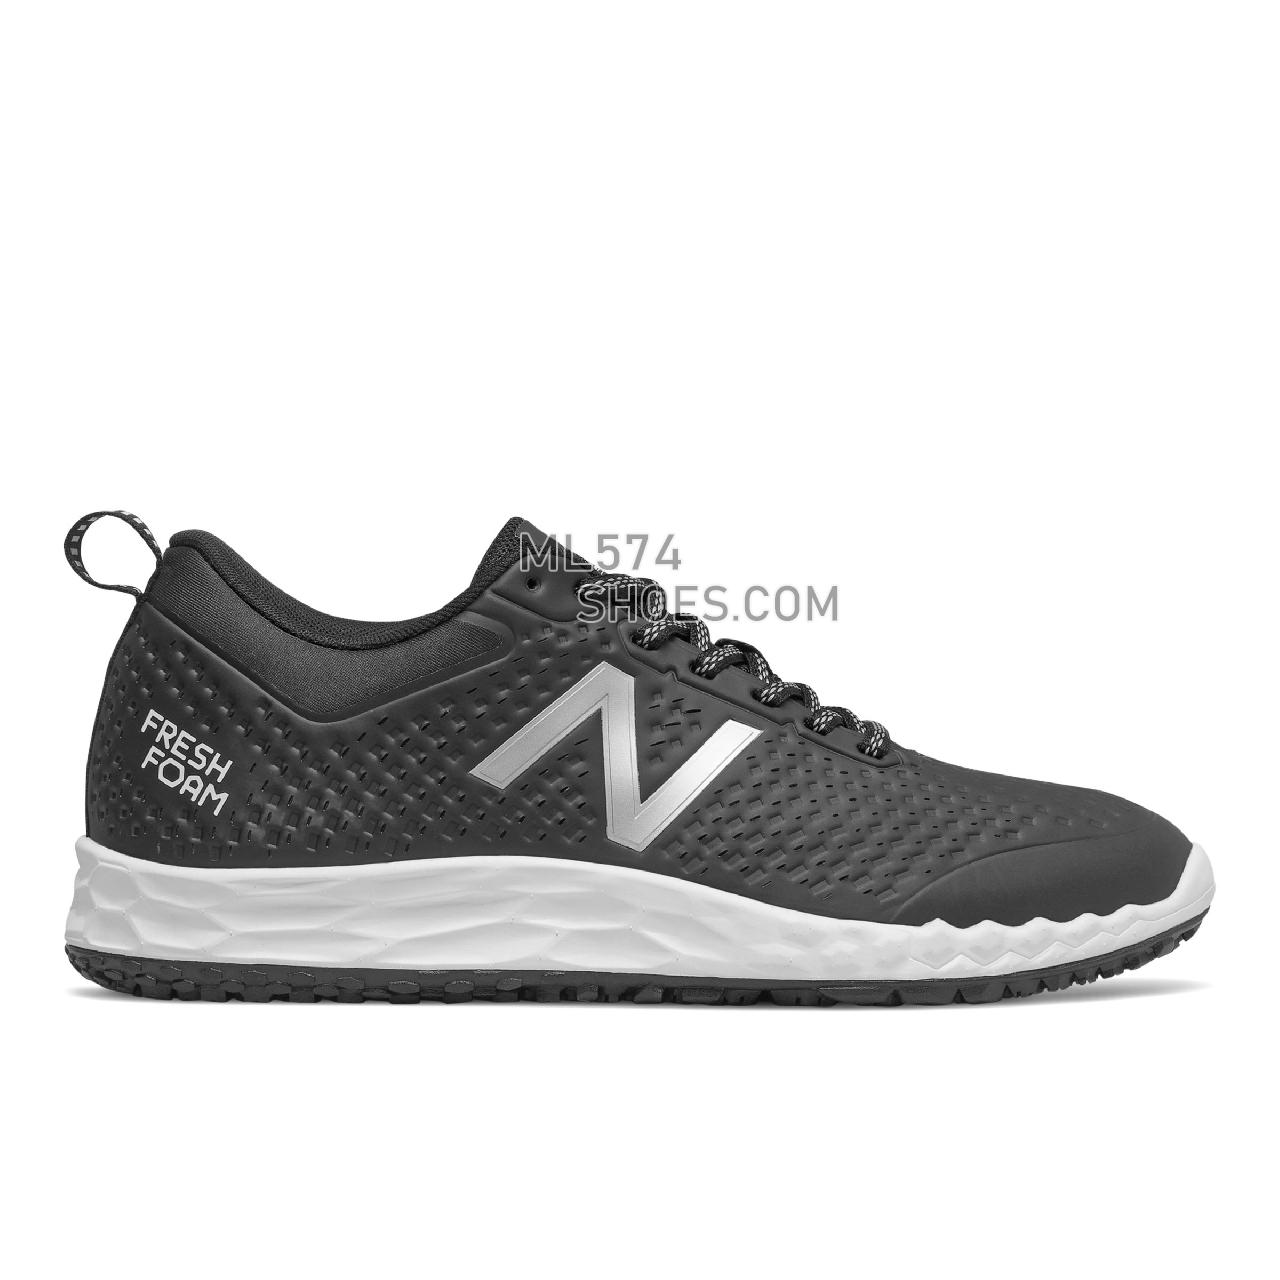 New Balance 806v1 - Men's Work - Black with Silver Metallic and White - MID806W1